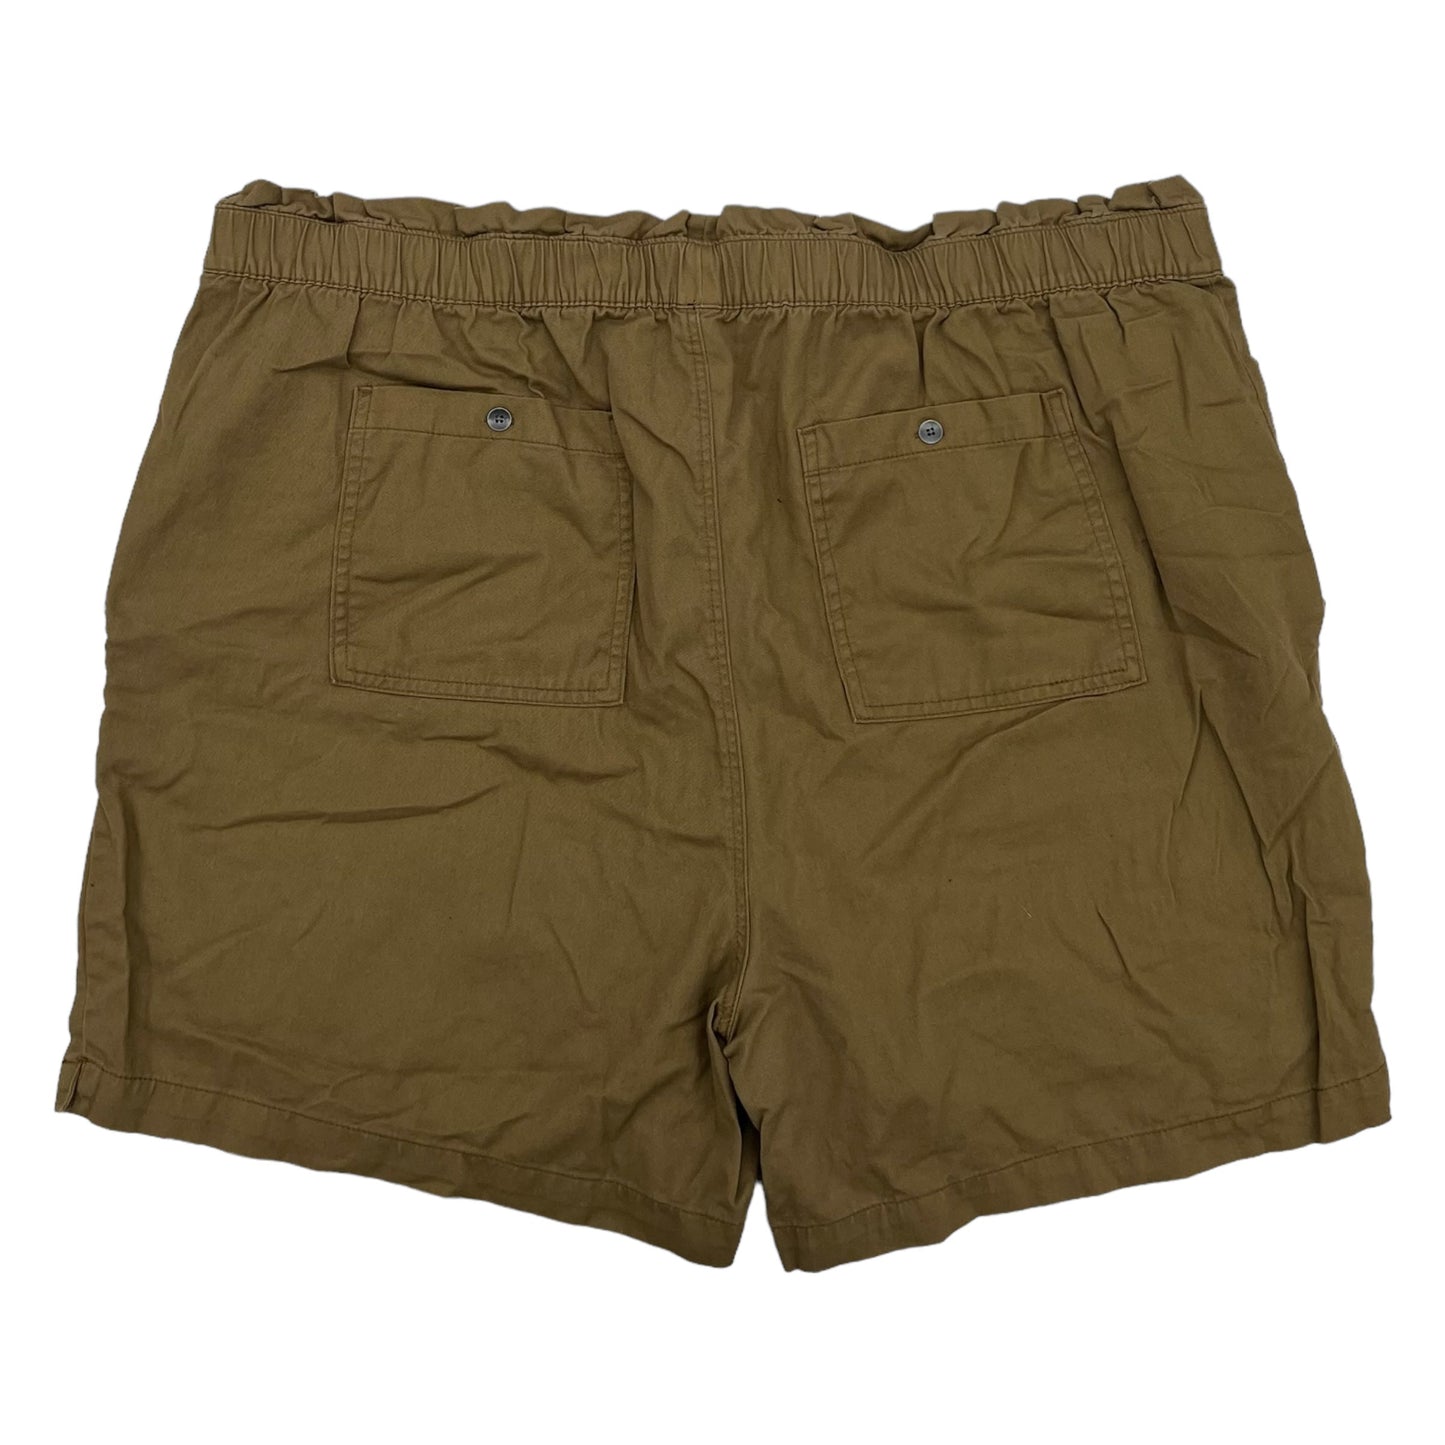 Shorts By Old Navy  Size: Xxl